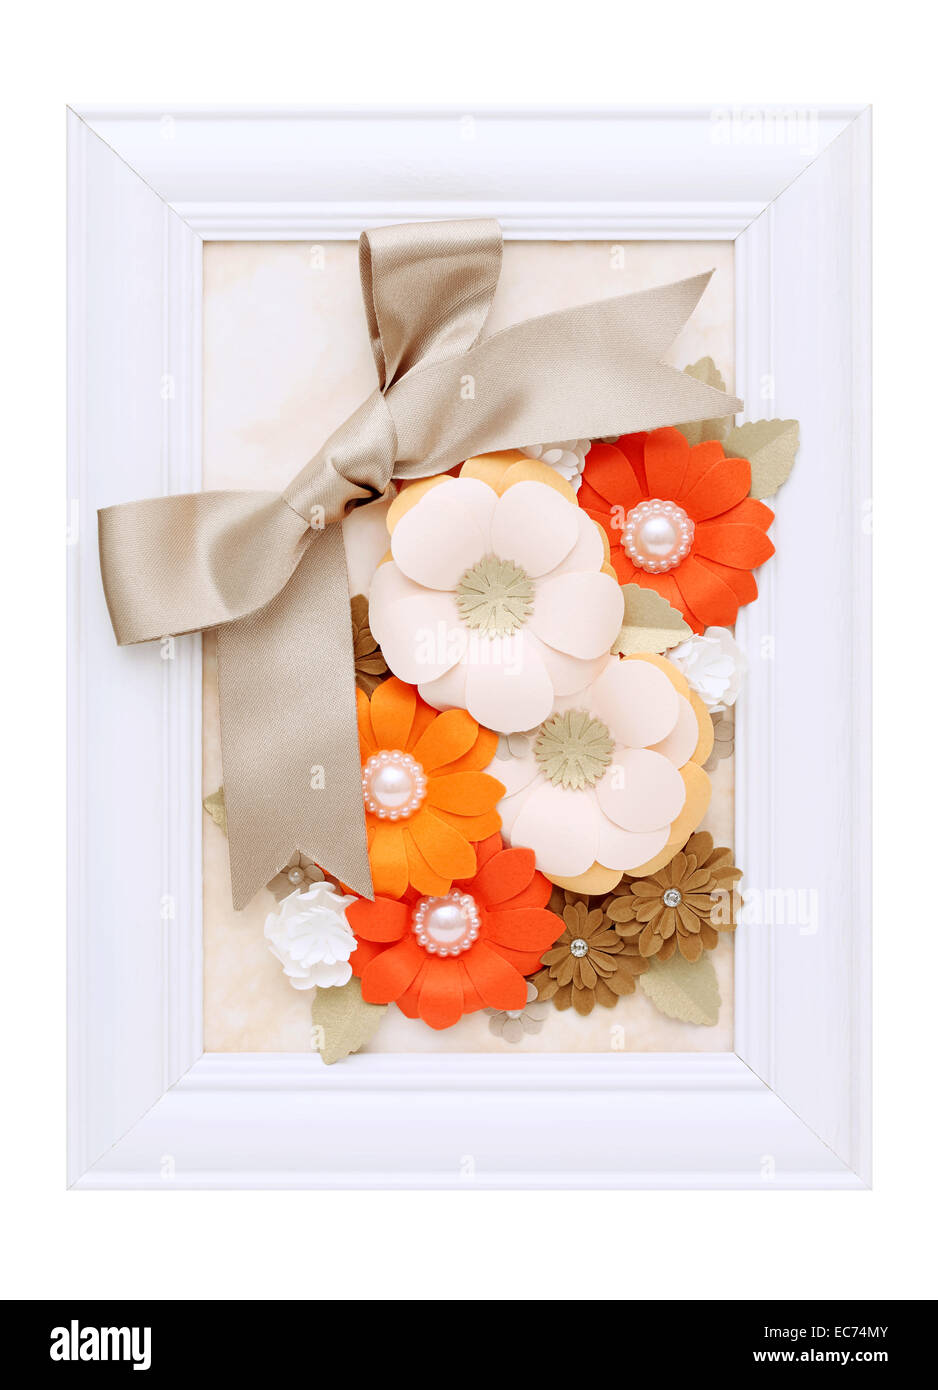 photo frame with handmade paper flower Stock Photo